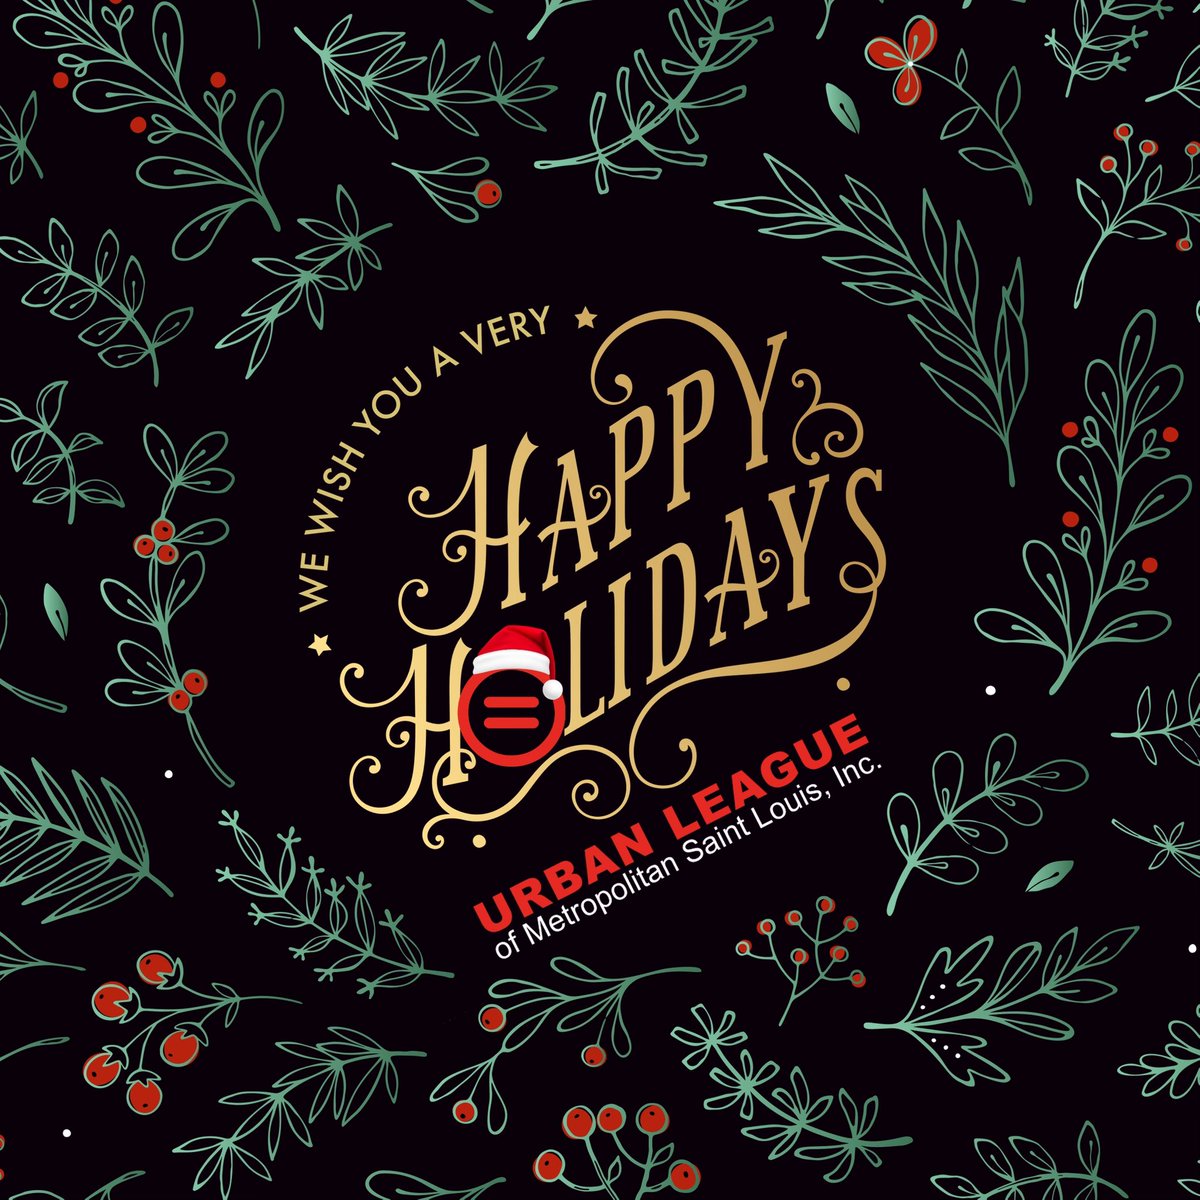 #HappyHolidays from the Urban League of Metro St. Louis. As the year ends, we're grateful for your #support and commitment. Wishing you #joy, #peace, and prosperity this festive season. Let's continue to strive for #equality and #empowerment, even on this #Christmas day.